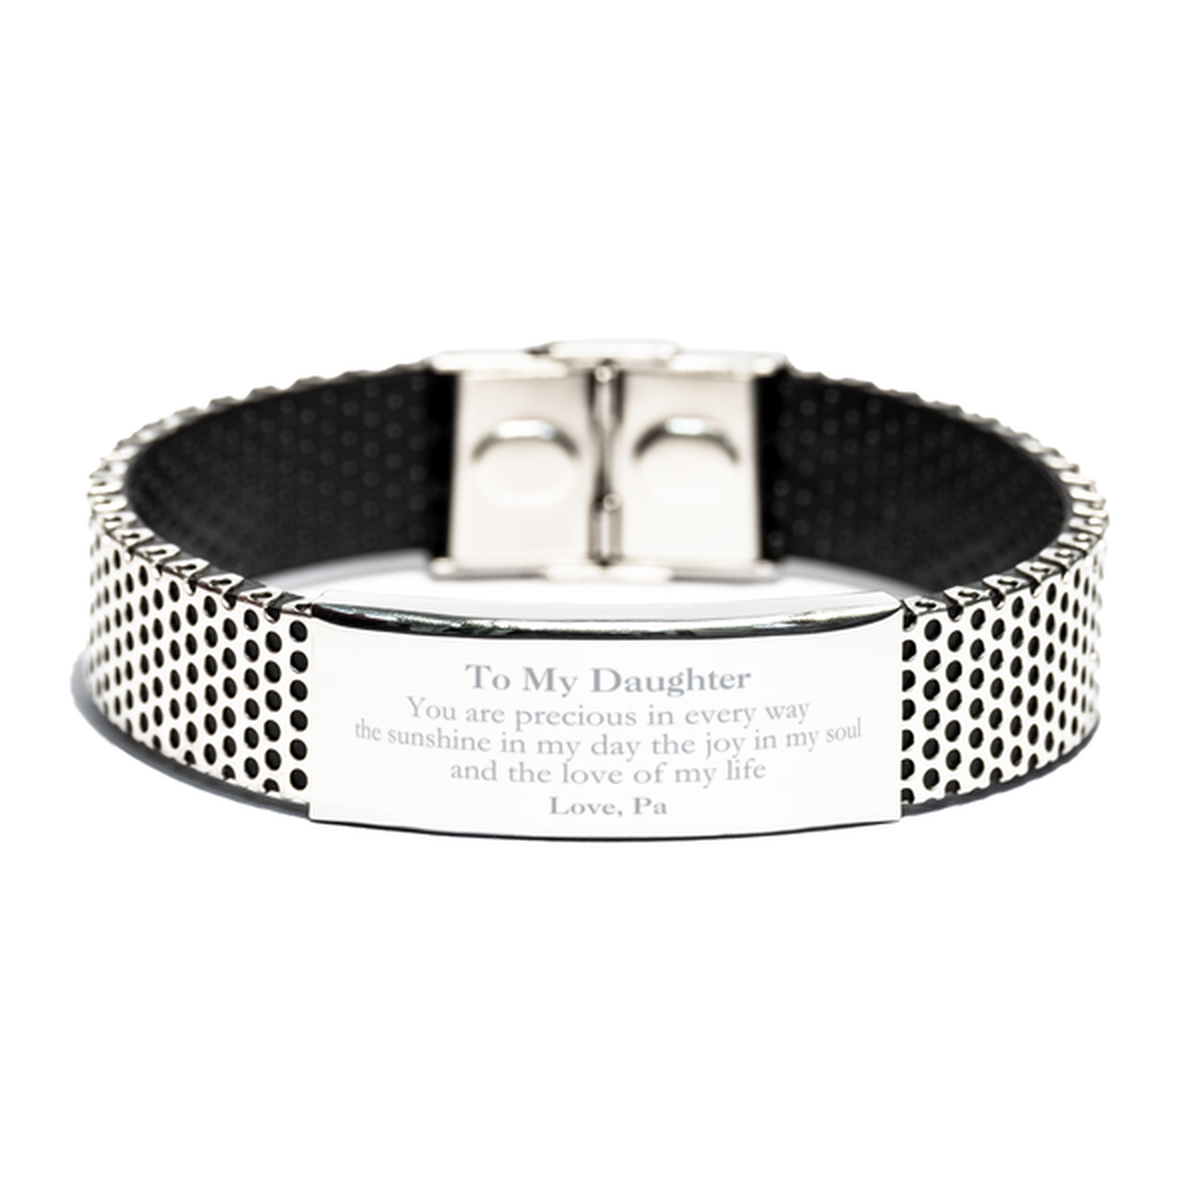 Graduation Gifts for Daughter Stainless Steel Bracelet Present from Pa, Christmas Daughter Birthday Gifts Daughter You are precious in every way the sunshine in my day. Love, Pa